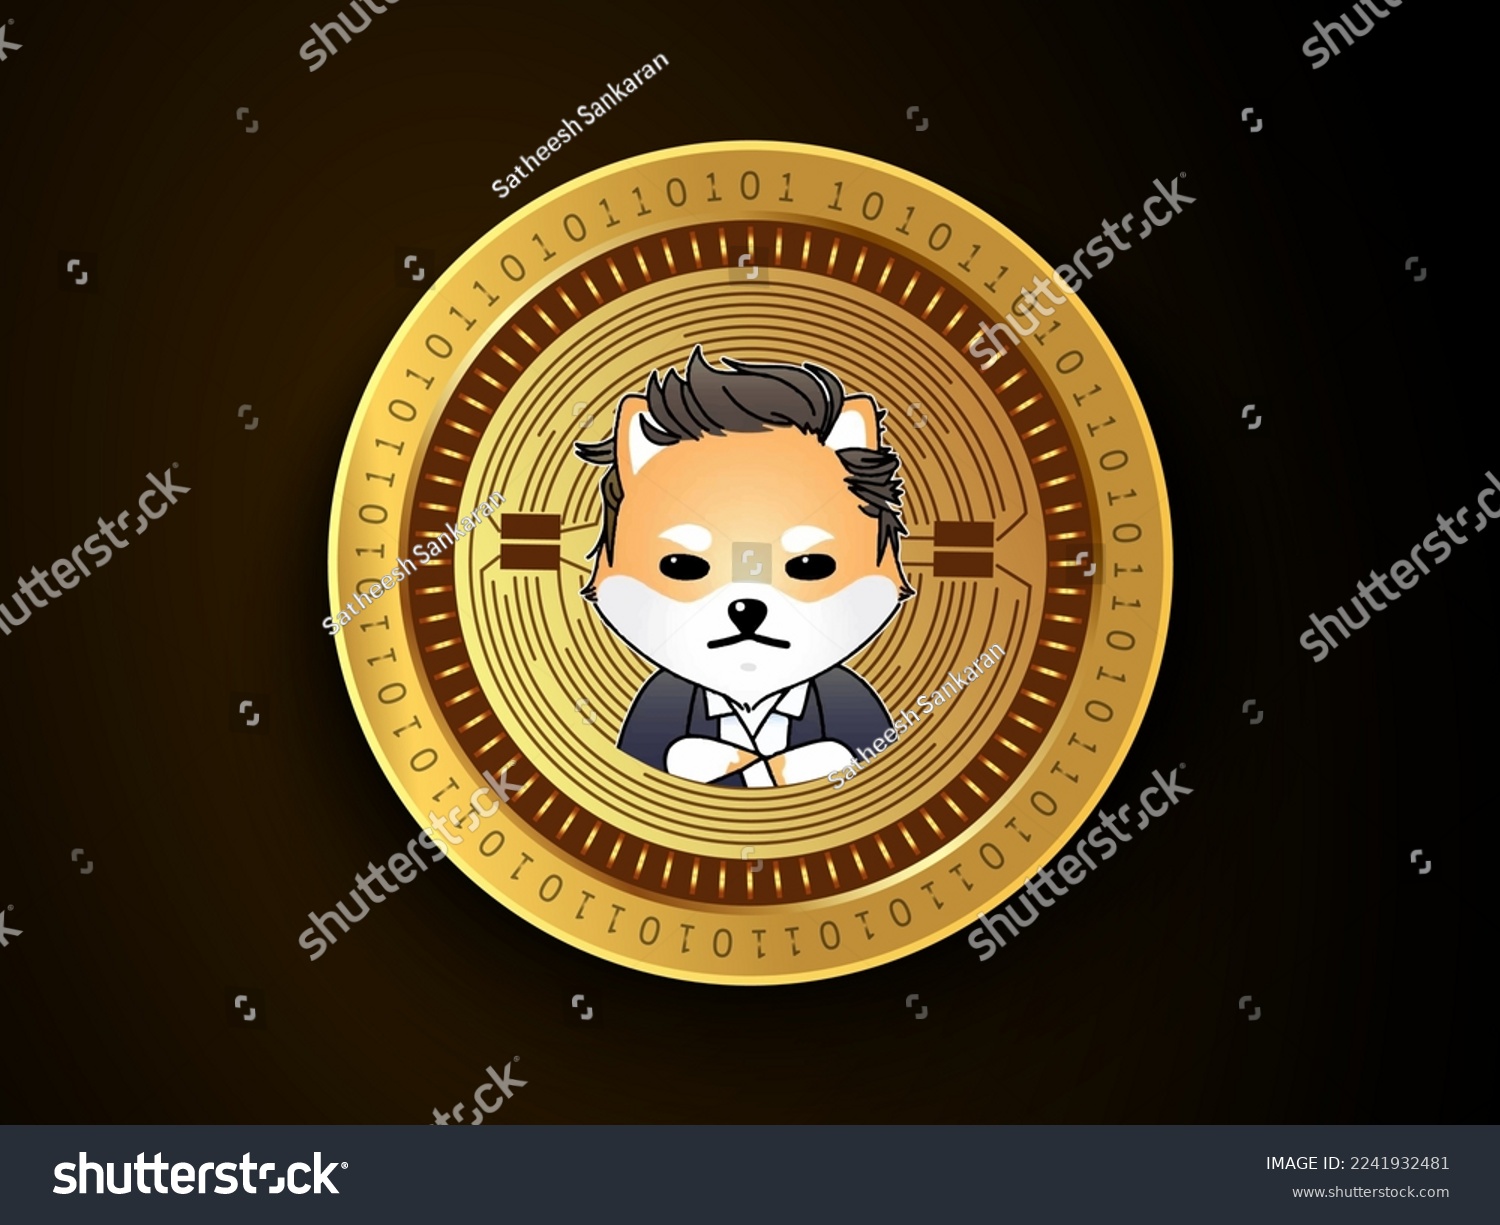 SVG of Dogelon Mars (ELON) crypto currency symbol and logo on gold coin. Virtual money concept token based on blockchain technology.  svg